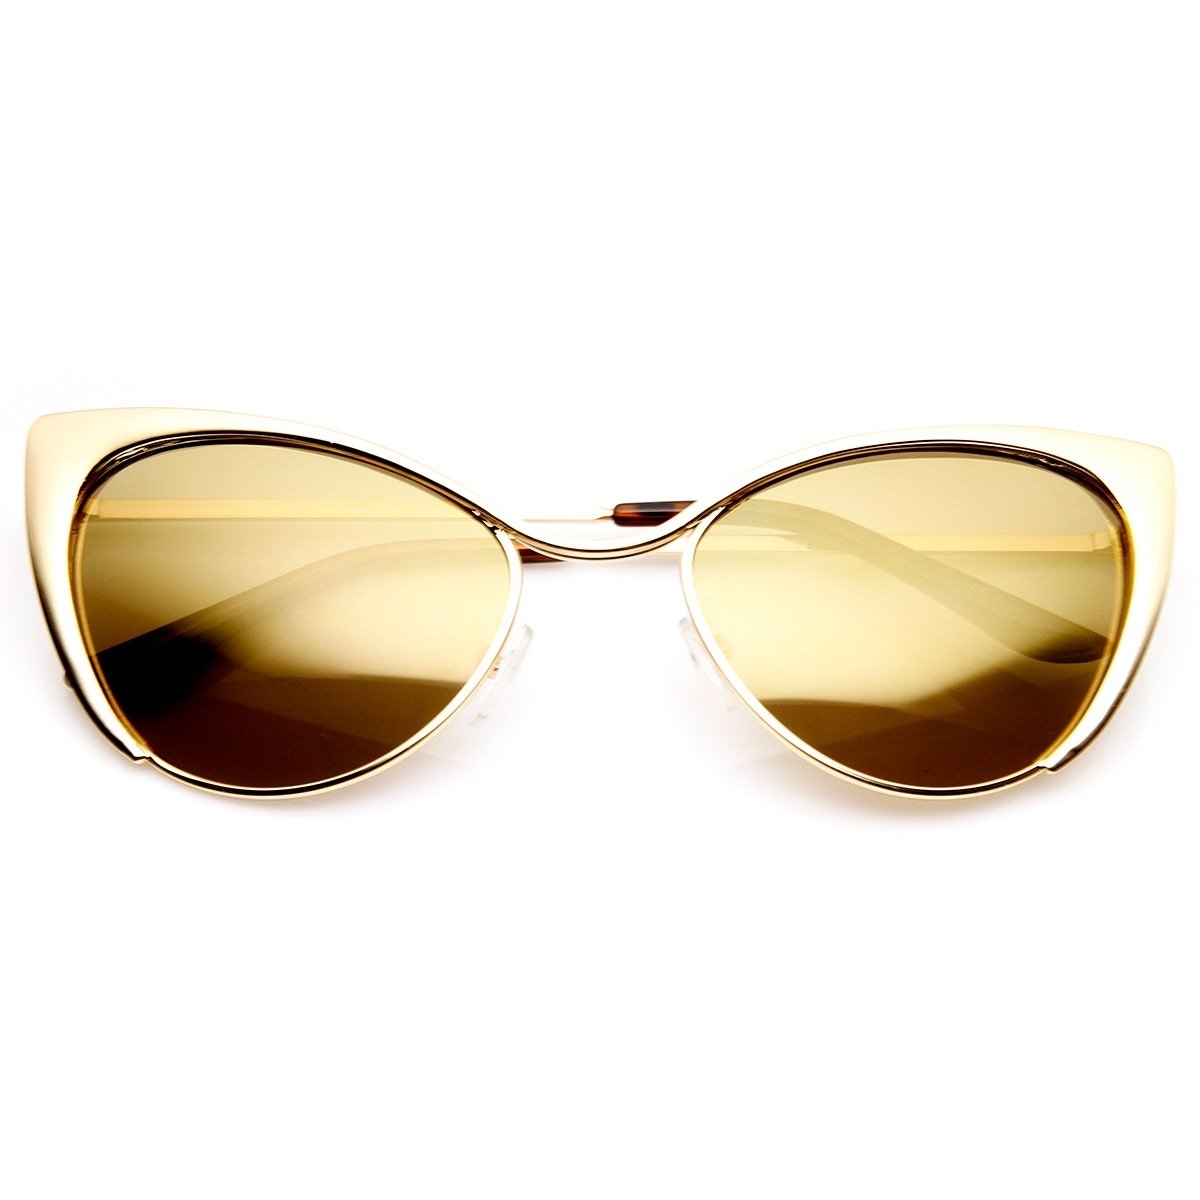 Womens Fashion Full Metal Color Mirrored Lens Cat Eye Sunglasses - Gold Ice